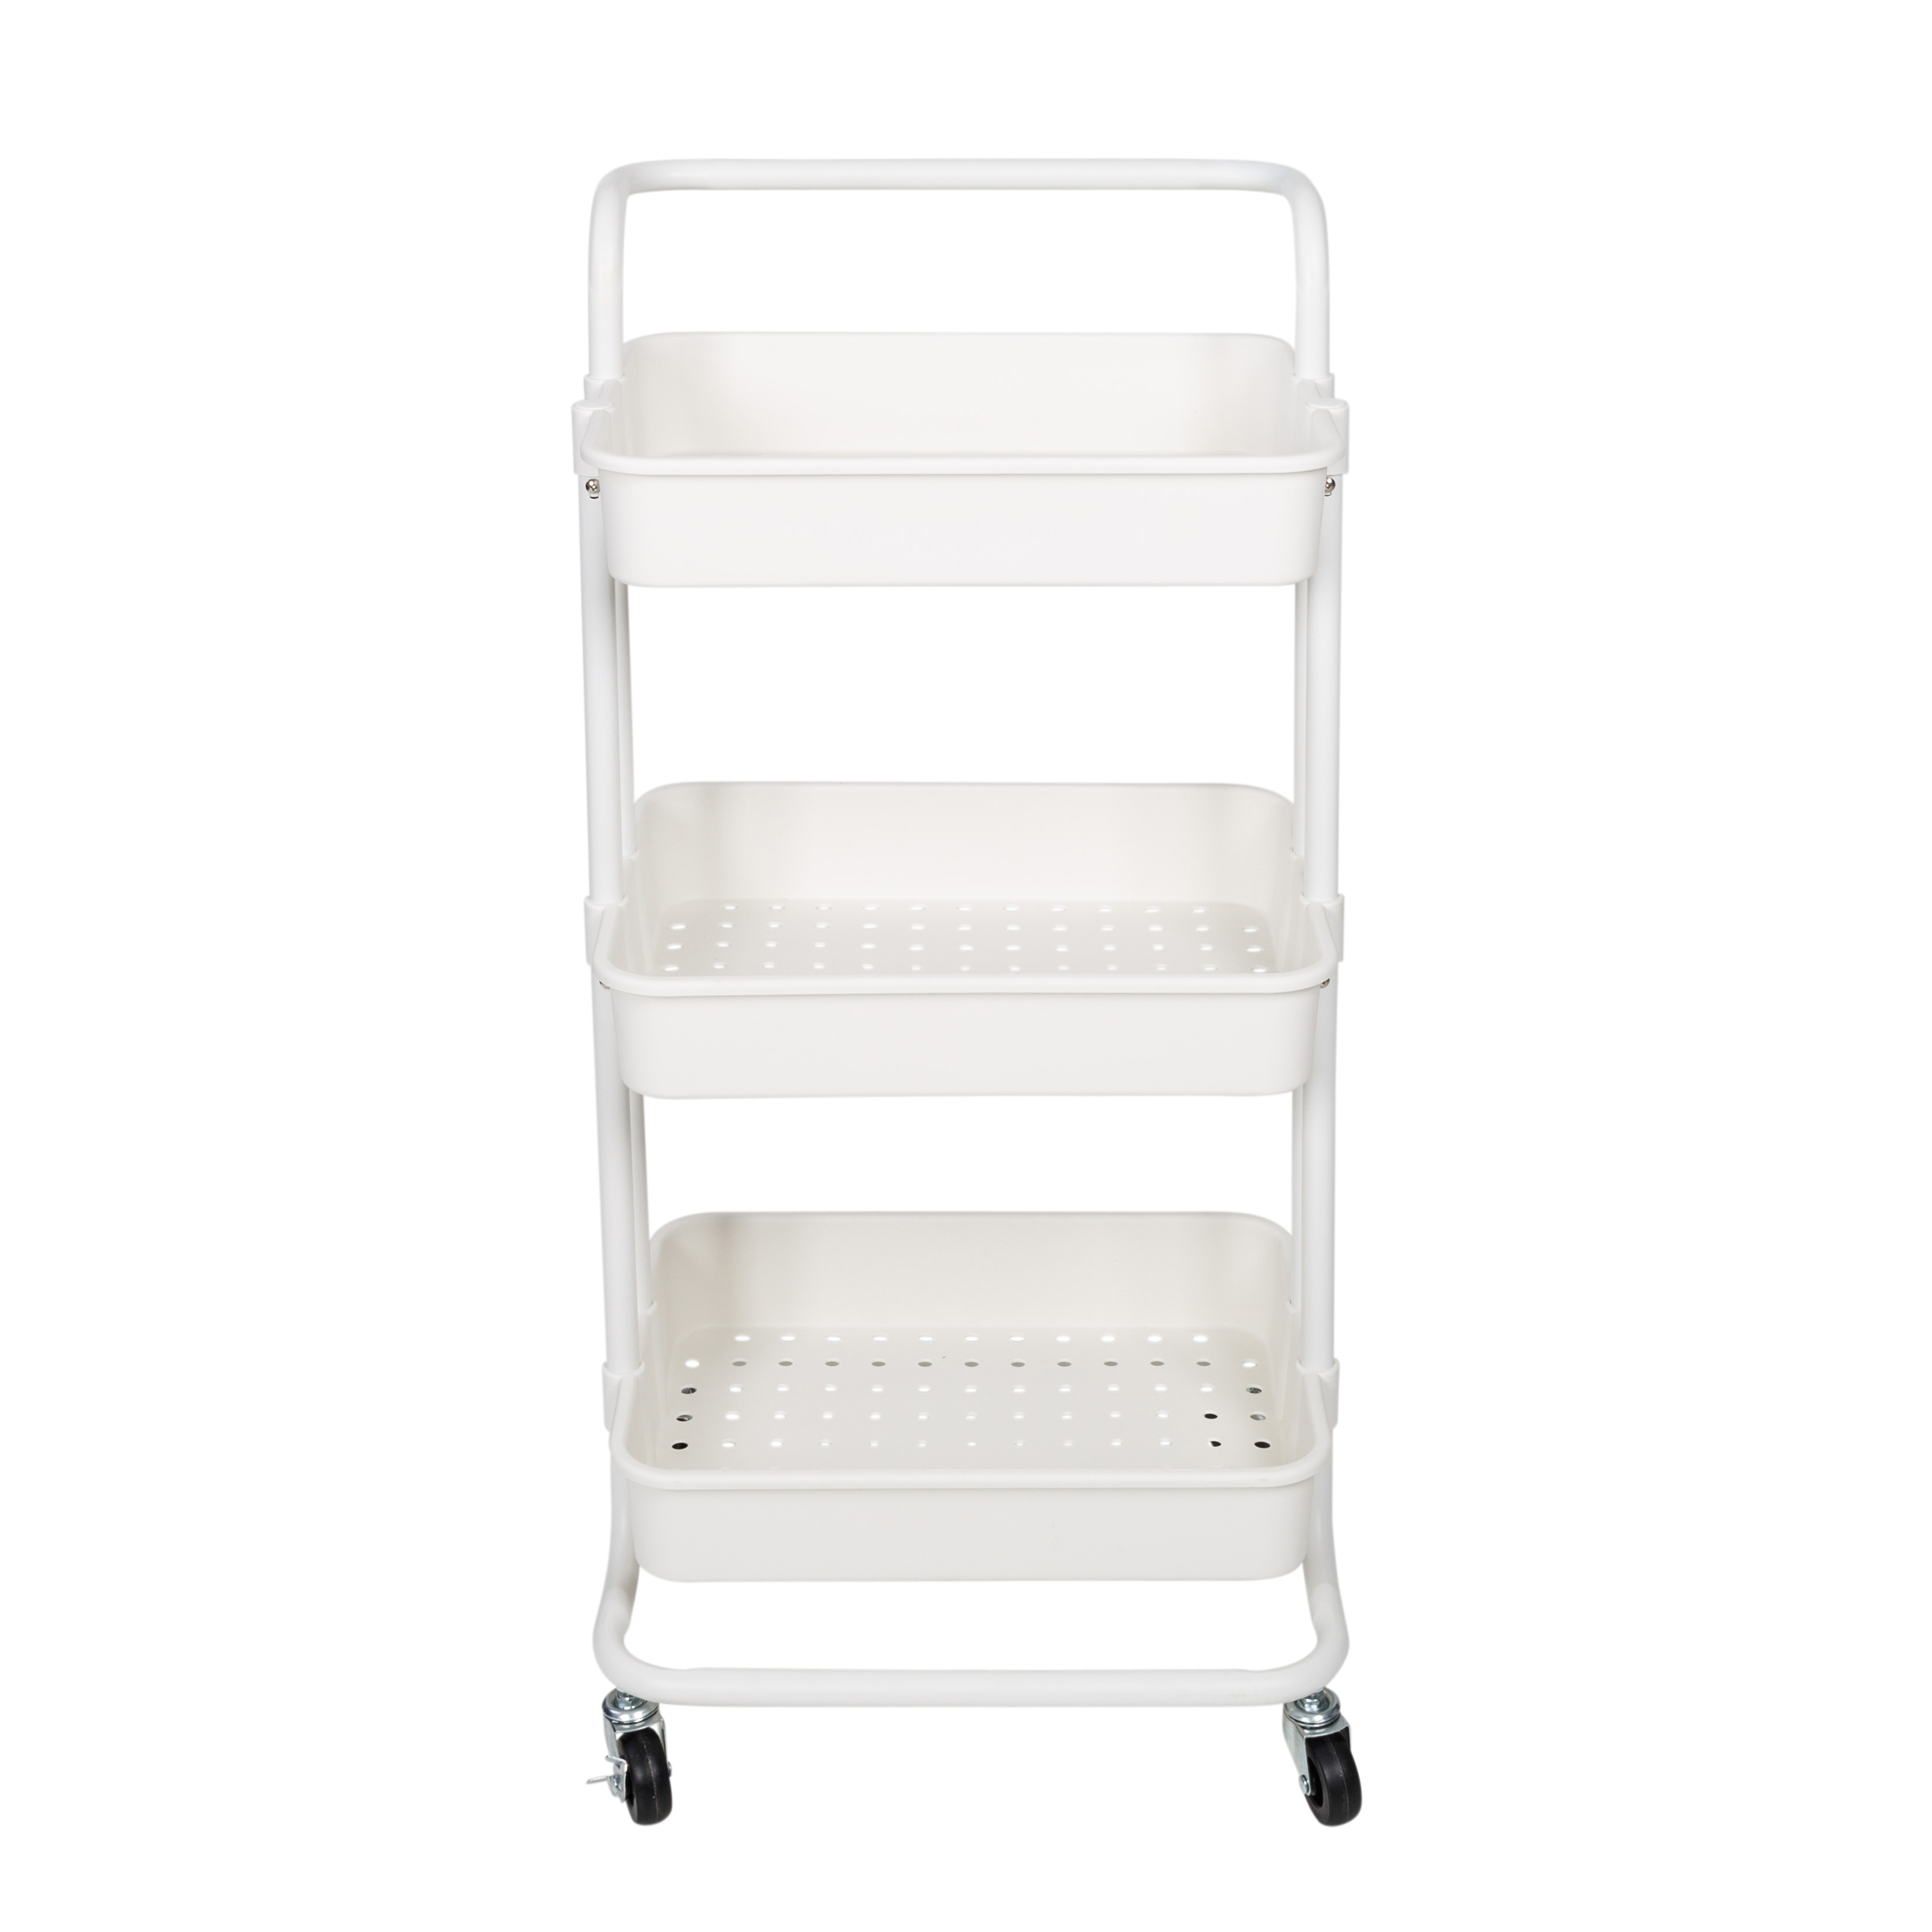 Honey Can Do, 3 Tier Rolling Craft Cart with Handle, White - image 2 of 6